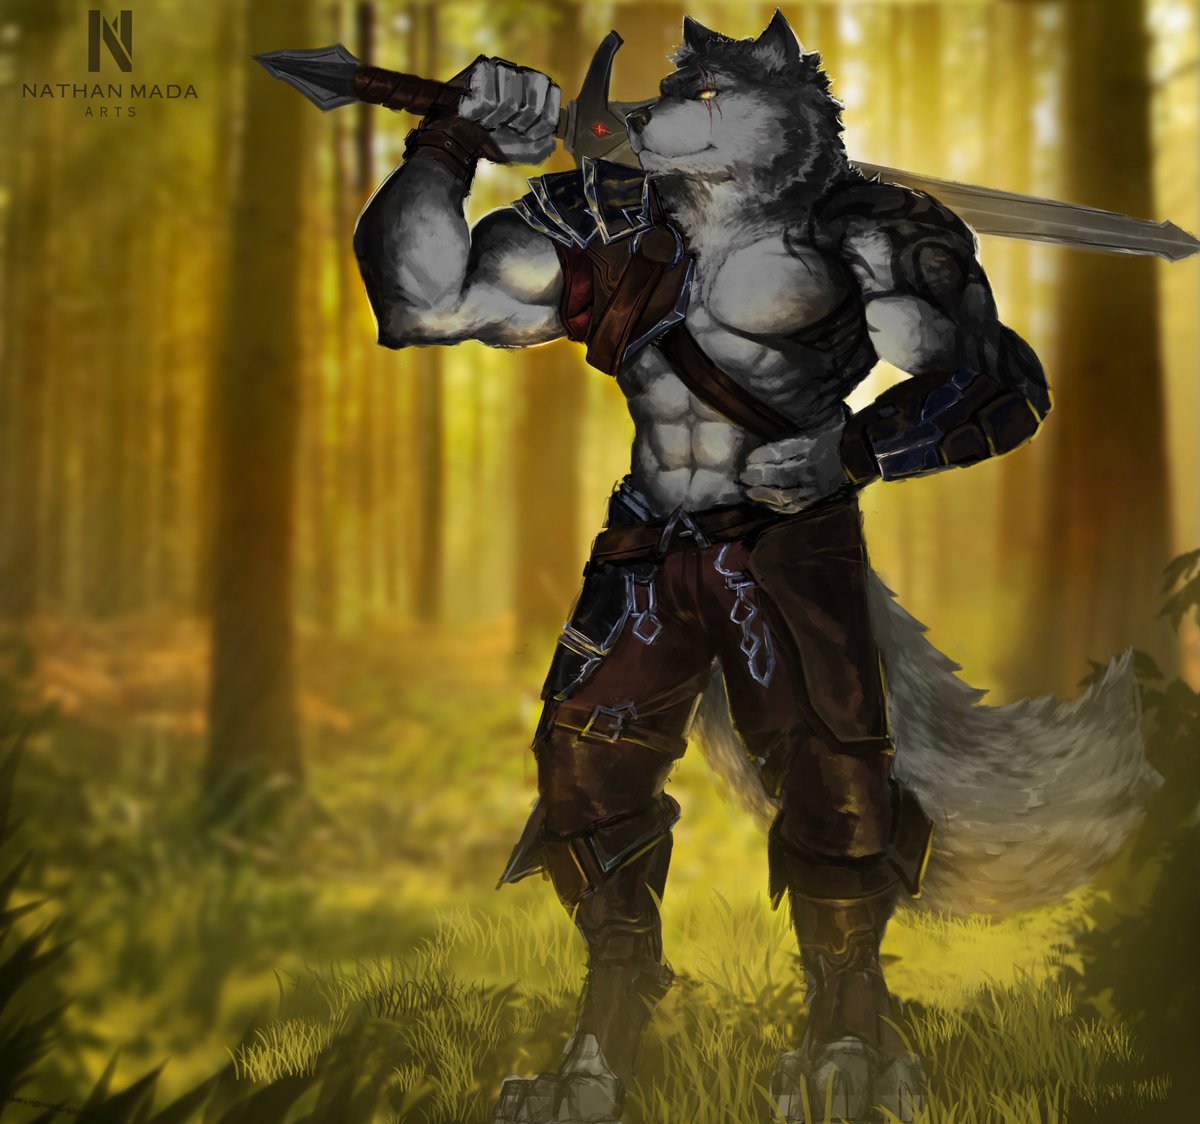 So, ok. Hear me out. I'm not a furry...BUT...

This amazing commission of my Rougarou D&D PC by the amazingly talented @nathanmada_arts ! 
A true pleasure to work with. Made it worth wading through the avalanche of scammers on Reddit xD

#ttrpg #commission #dndart